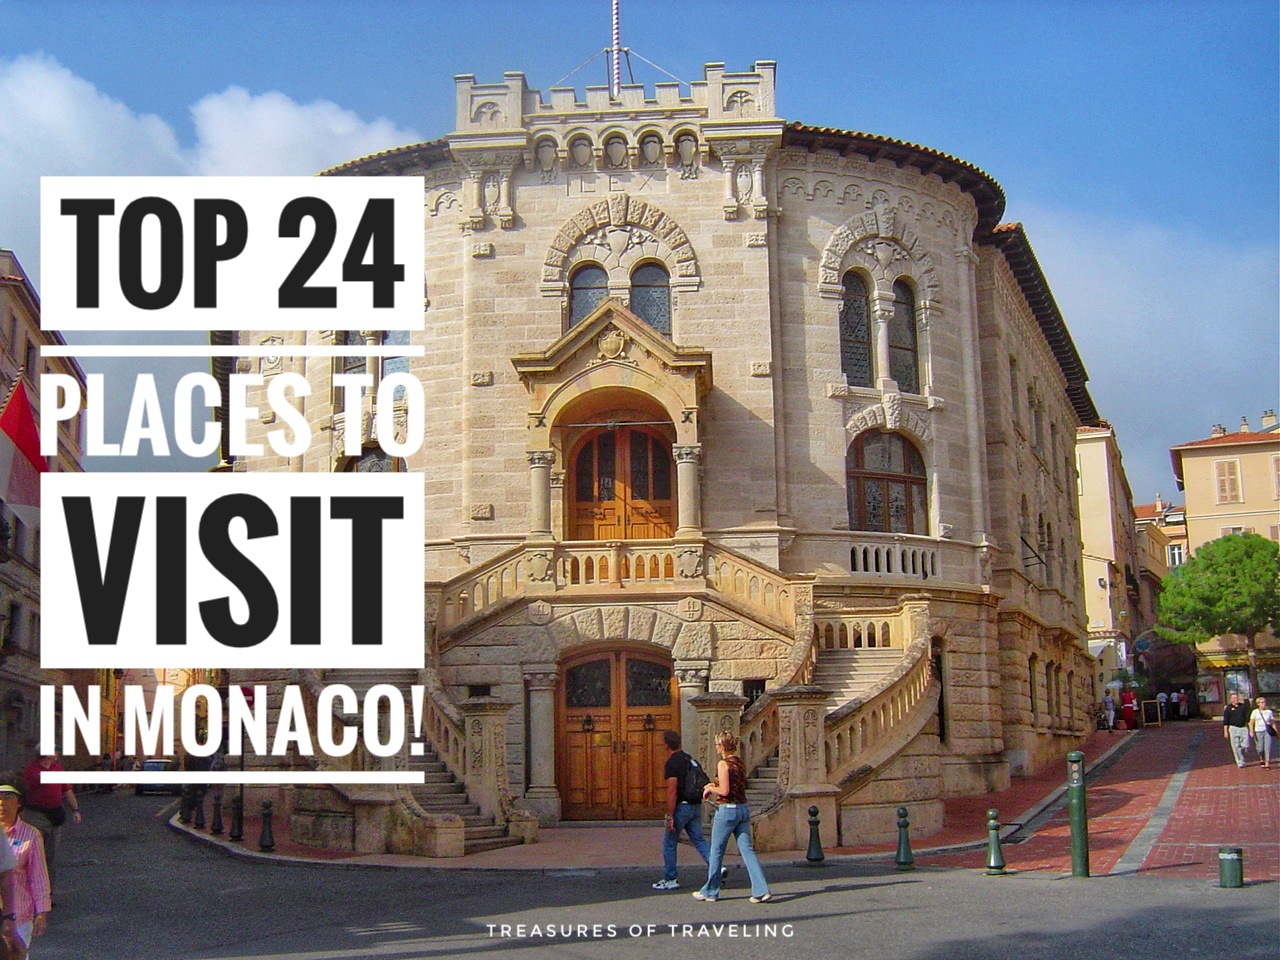 Monaco might be one of the smallest countries in the world, but there are a lot of things to discover from the Monte Carlo Casino to the Prince’s Palace on top of the Rock of Monaco and everything in between. Check out the top 24 places to visit in Monaco!